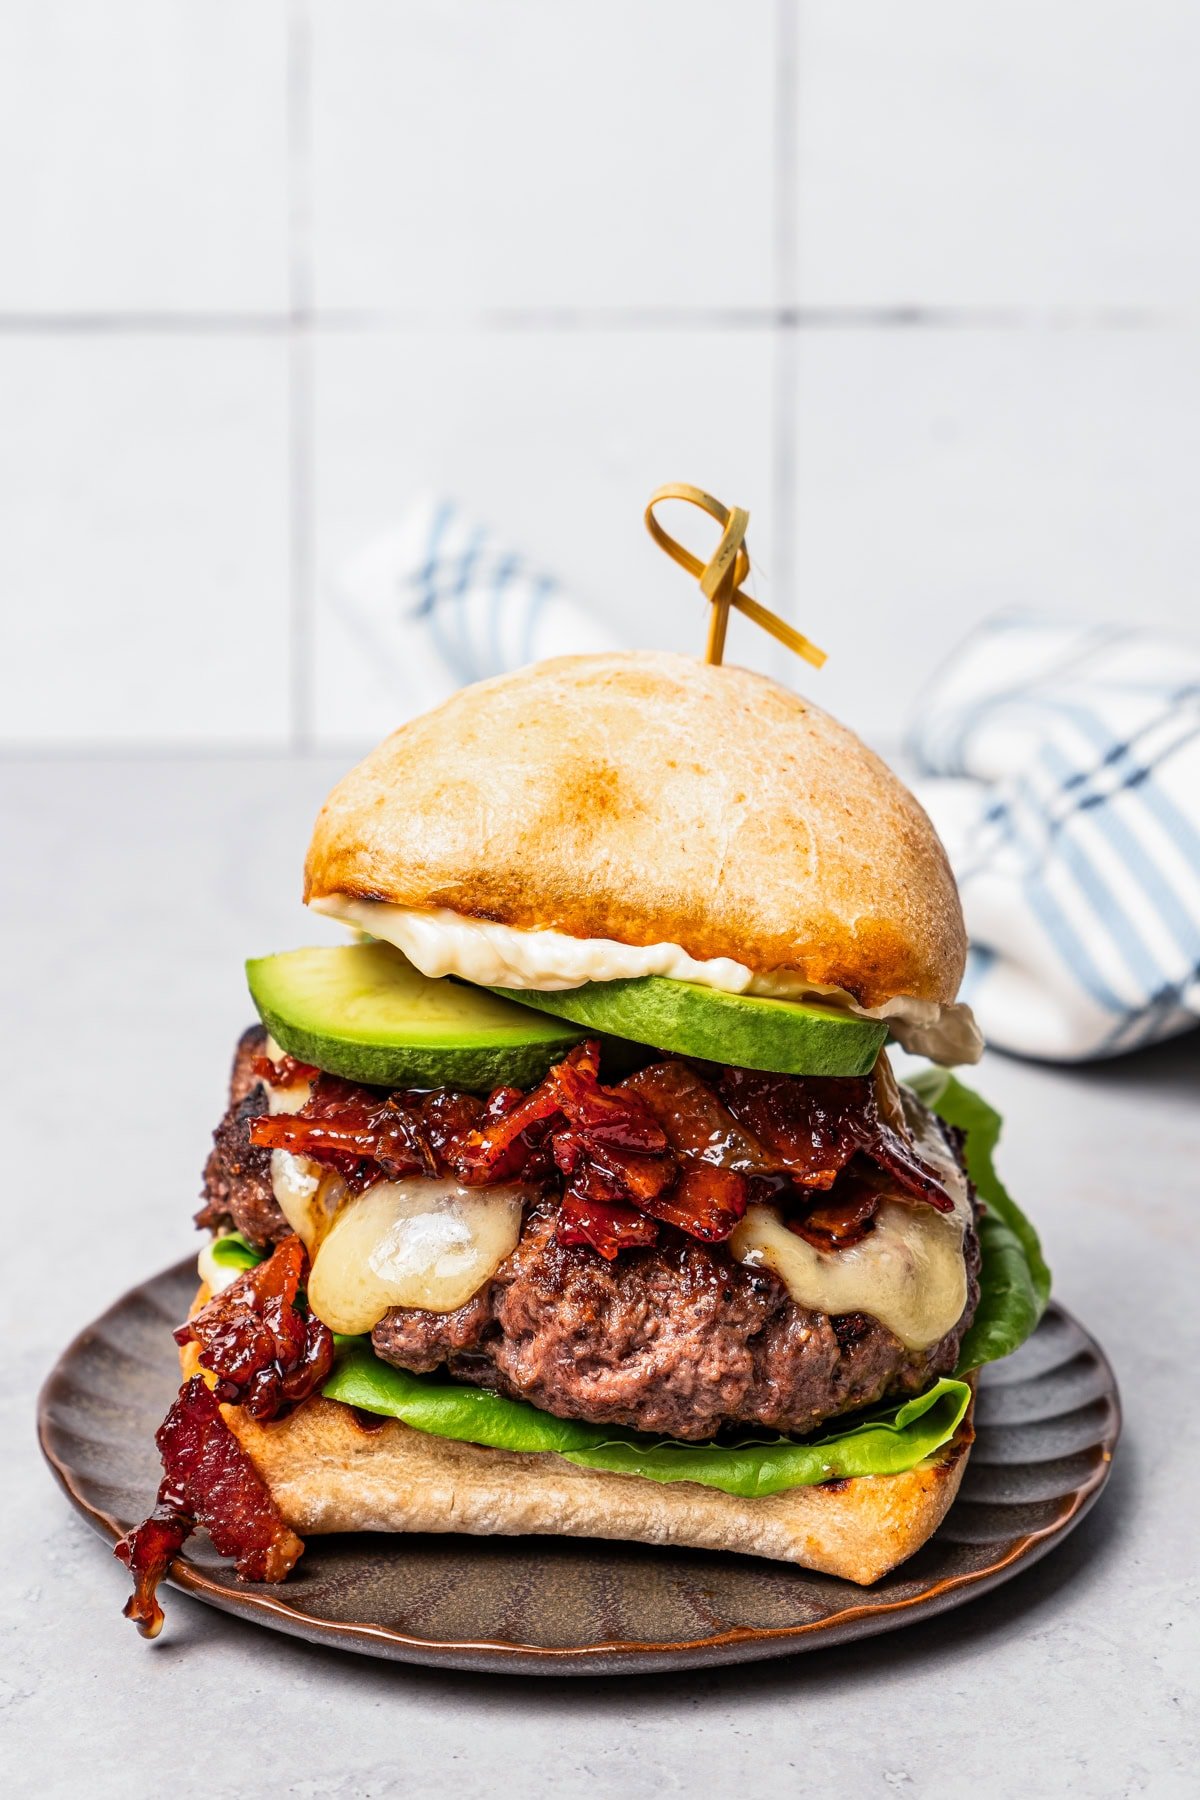 Burger with beef patty, avocado slices, and bacon jam served on a brown plate.